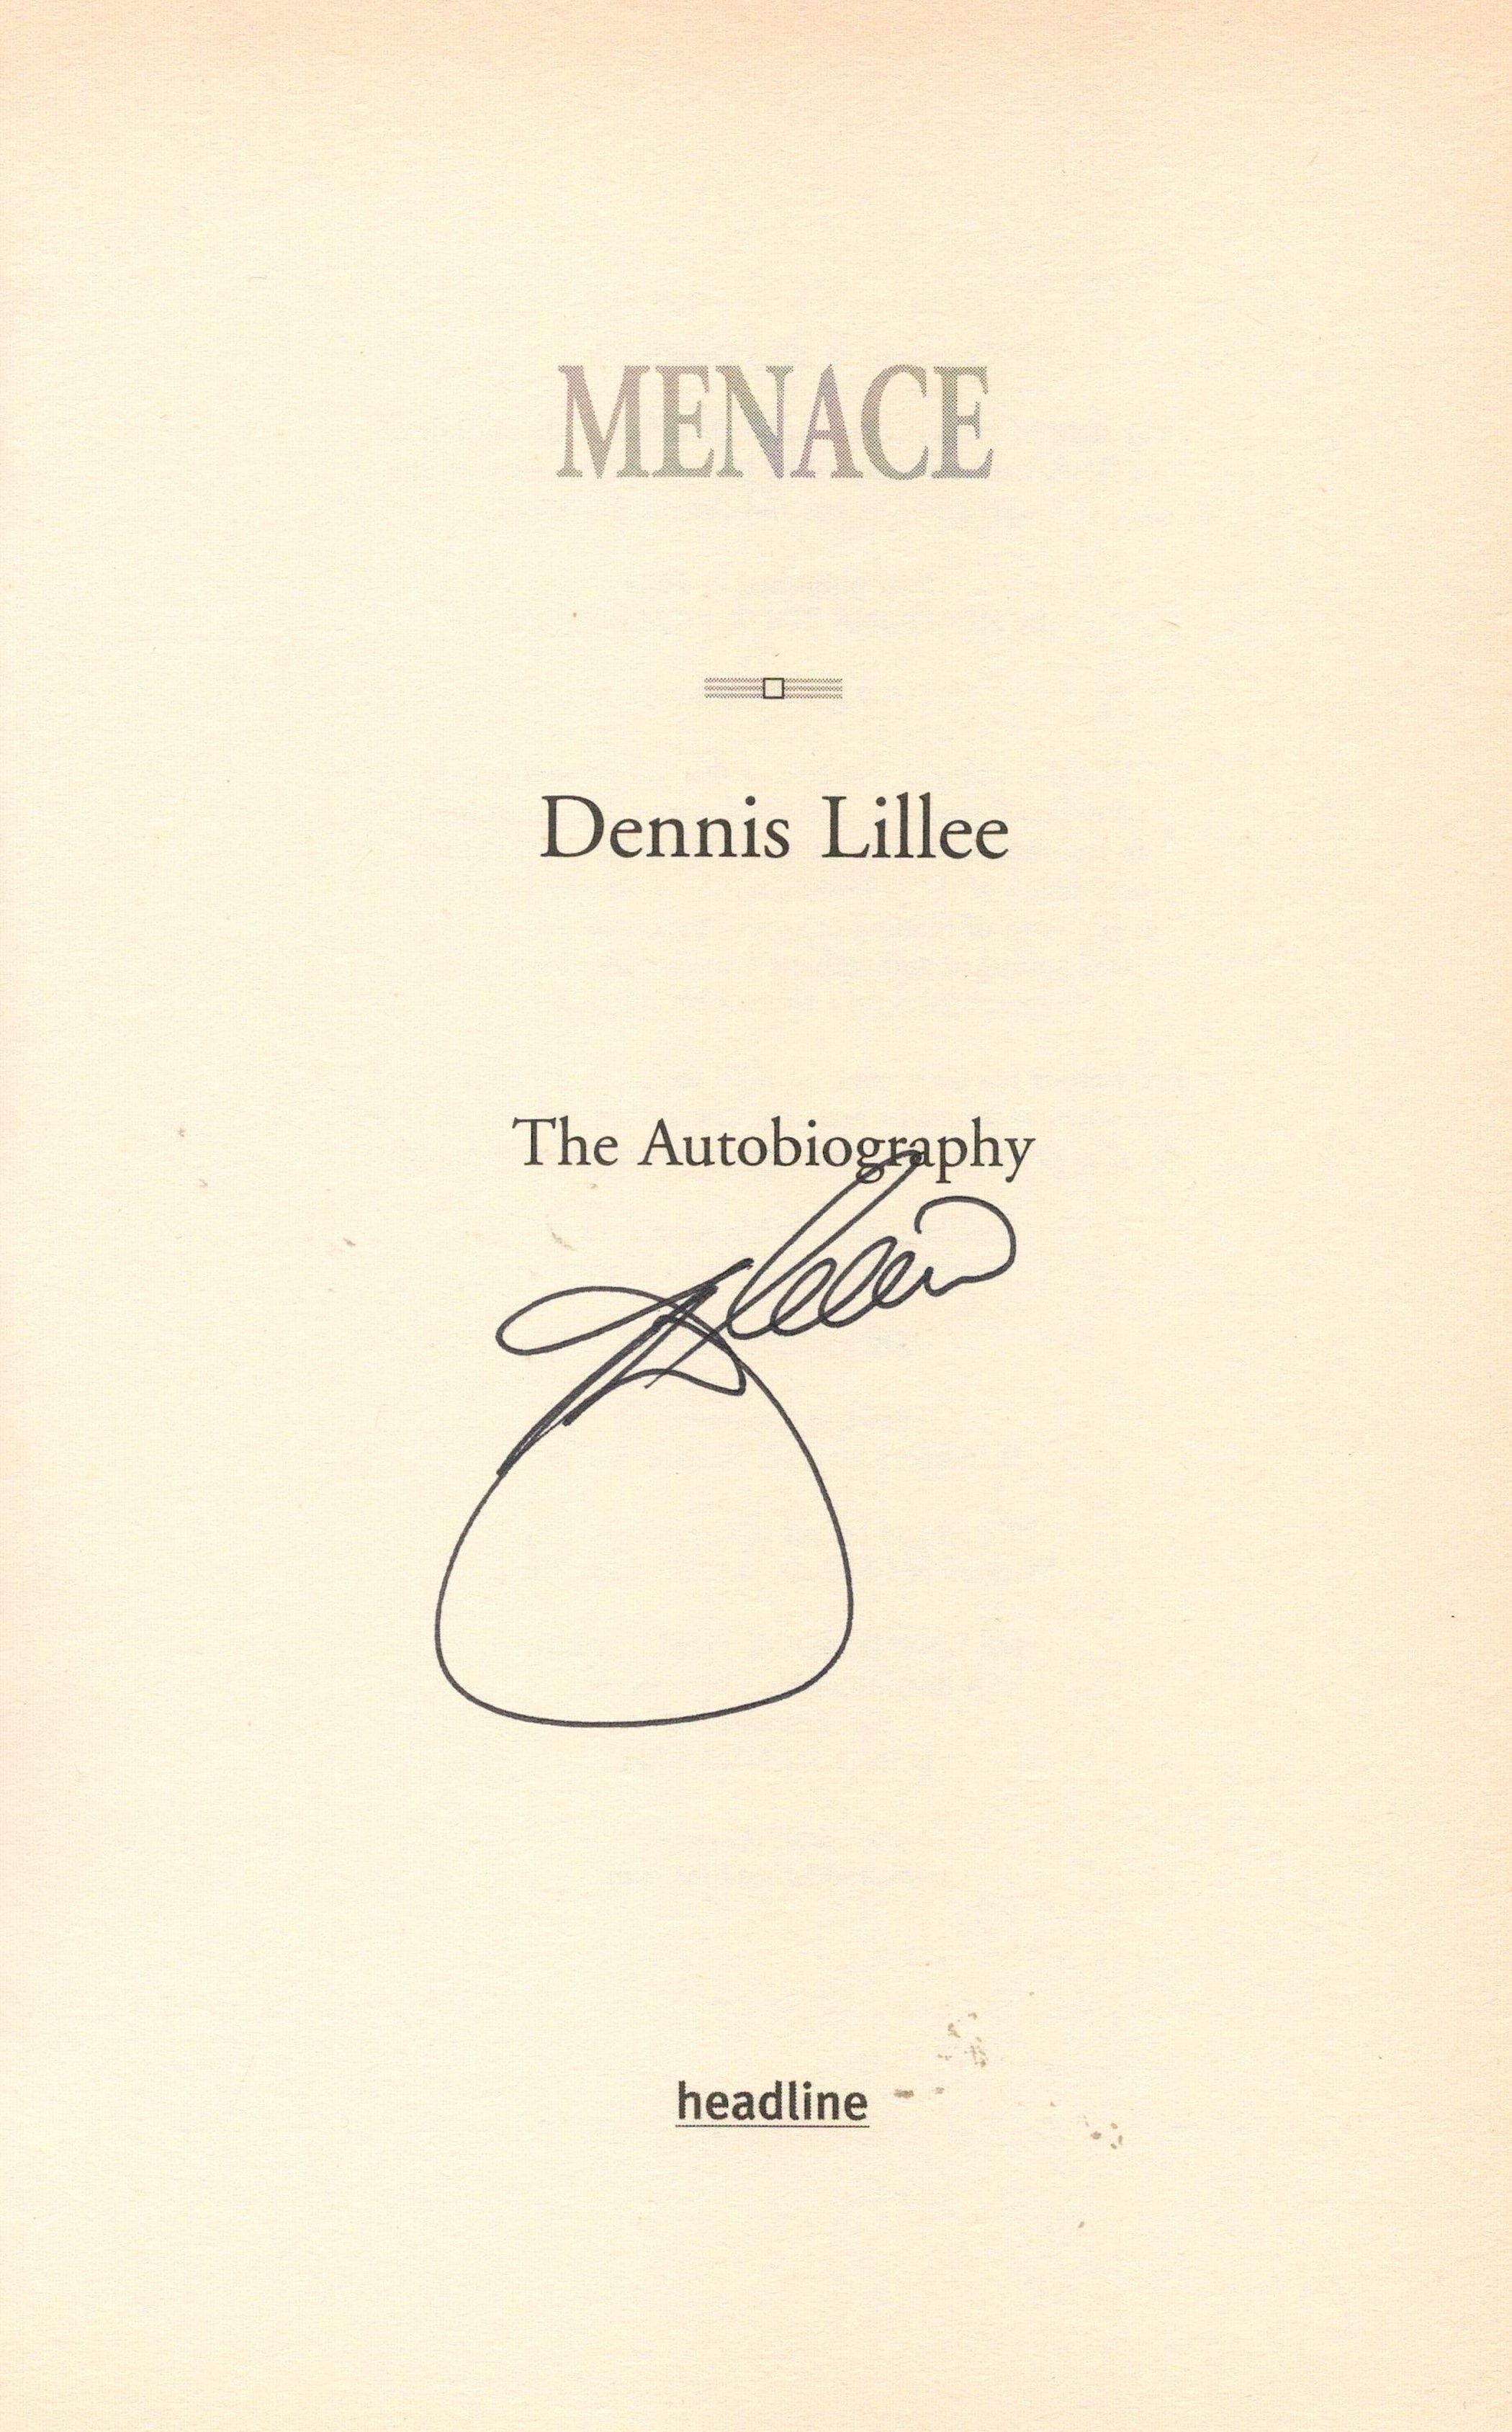 Signed Book Dennis Lillee The Autobiography Menace First Edition 2003 Hardback Book Signed by Dennis - Image 3 of 4